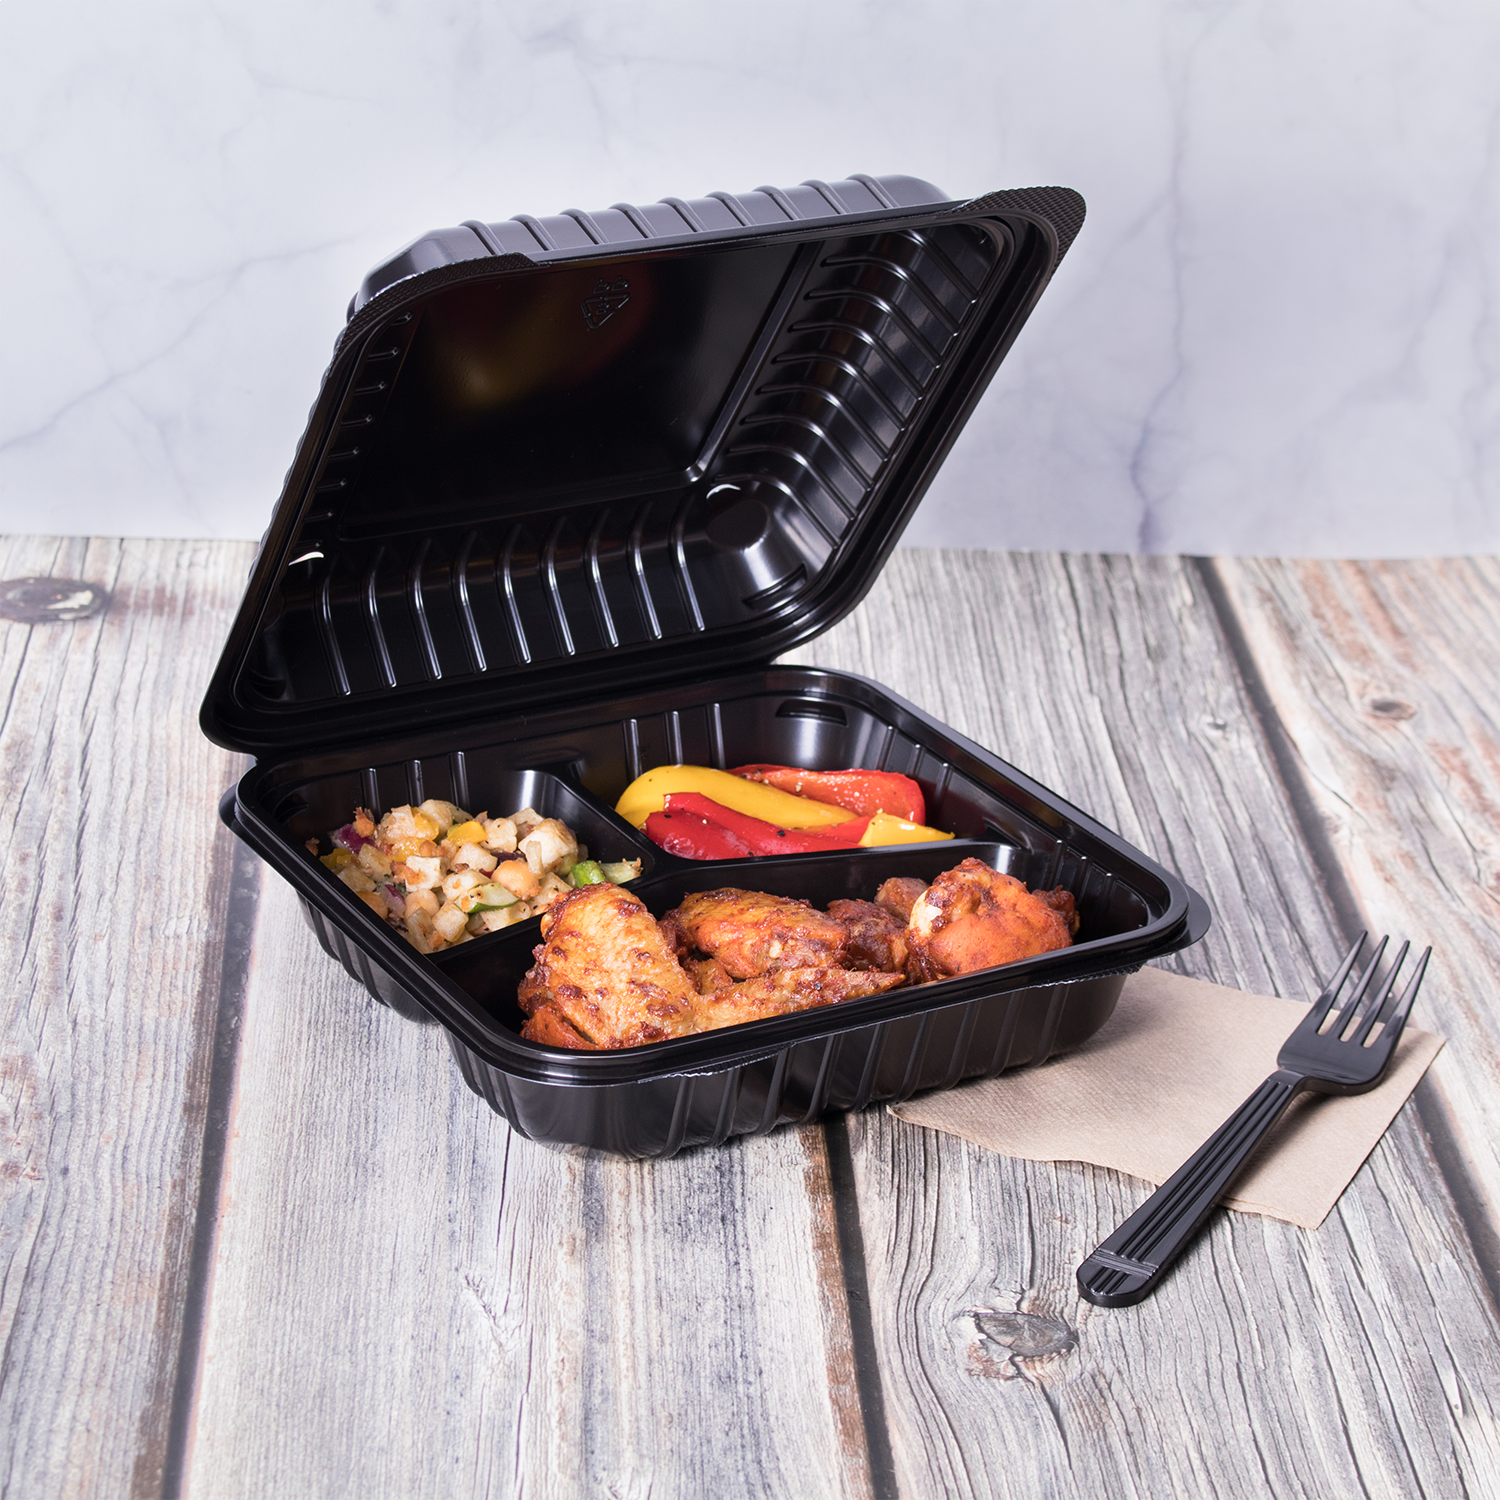 3 Compartment Hinged Take Out Boxes - Large Black Clamshell Containers